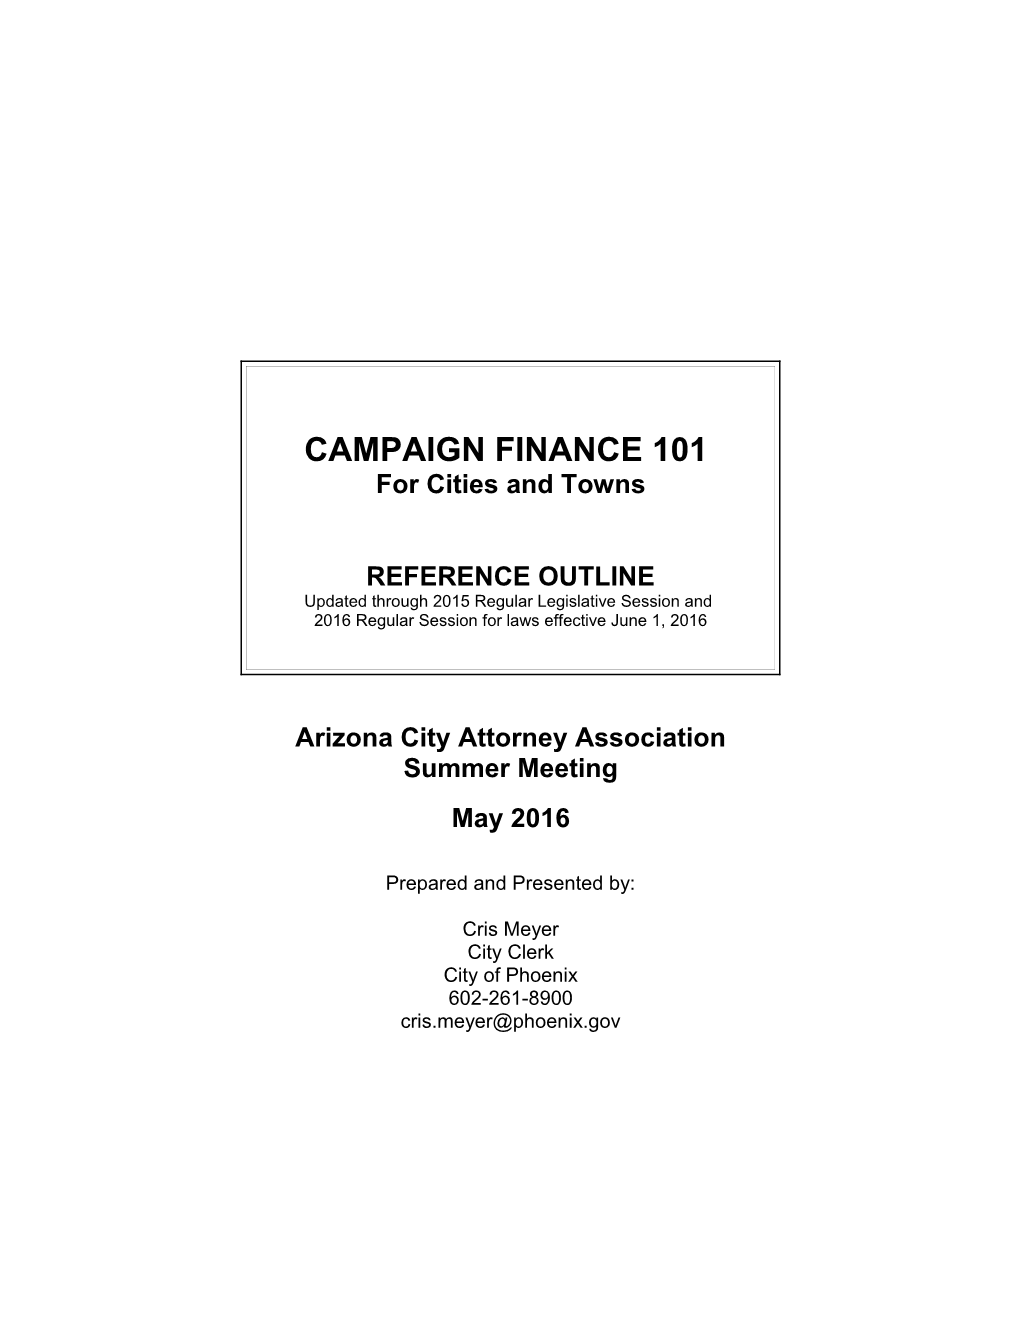 Political Committees and Campaign Finance Reporting